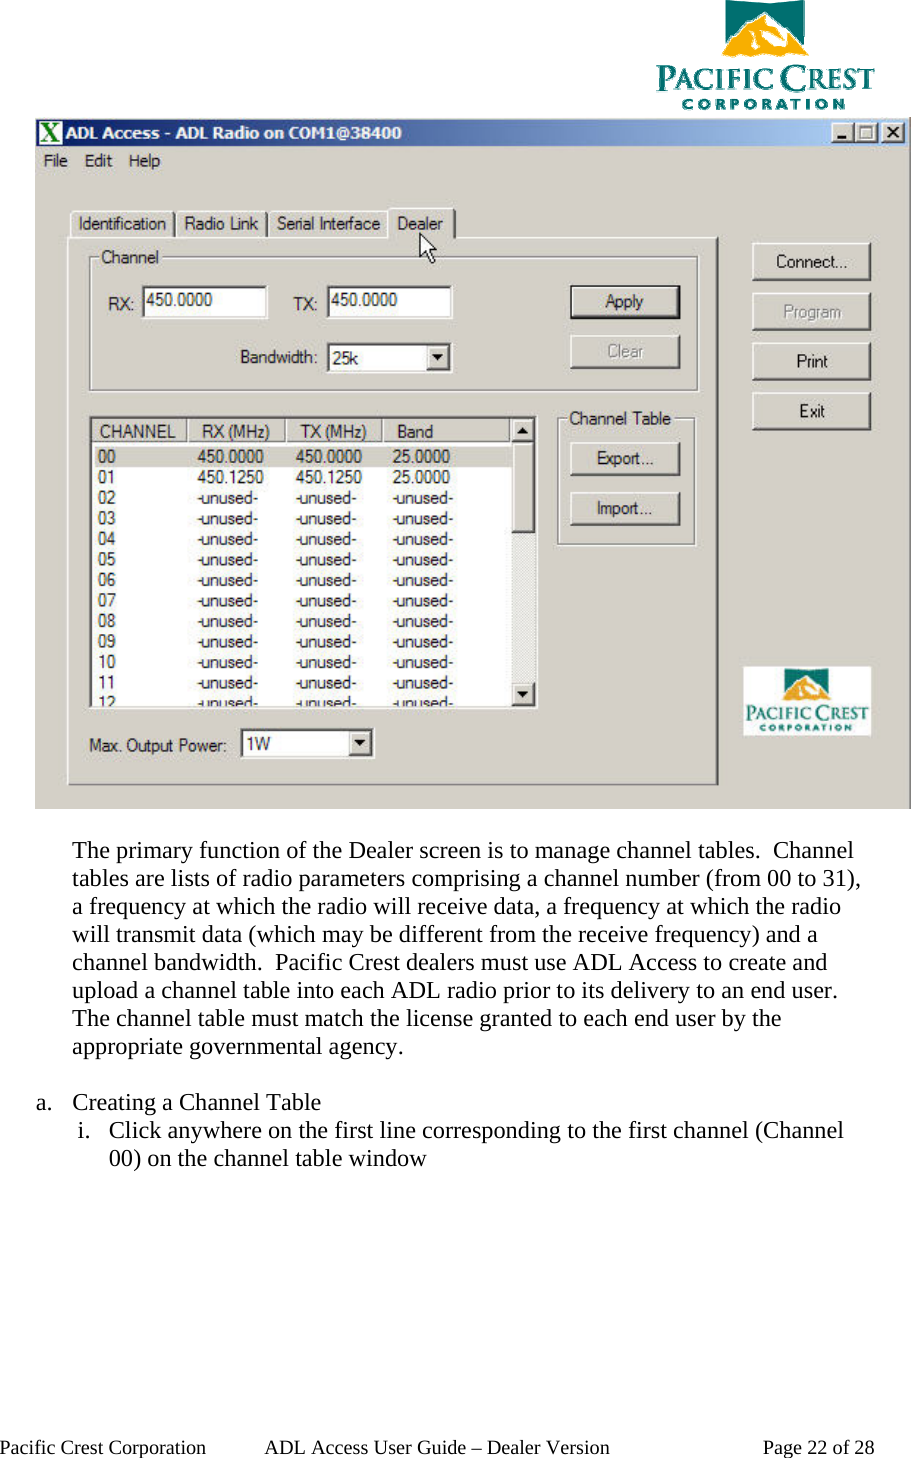  Pacific Crest Corporation  ADL Access User Guide – Dealer Version  Page 22 of 28   The primary function of the Dealer screen is to manage channel tables.  Channel tables are lists of radio parameters comprising a channel number (from 00 to 31), a frequency at which the radio will receive data, a frequency at which the radio will transmit data (which may be different from the receive frequency) and a channel bandwidth.  Pacific Crest dealers must use ADL Access to create and upload a channel table into each ADL radio prior to its delivery to an end user.  The channel table must match the license granted to each end user by the appropriate governmental agency.   a. Creating a Channel Table i. Click anywhere on the first line corresponding to the first channel (Channel 00) on the channel table window 